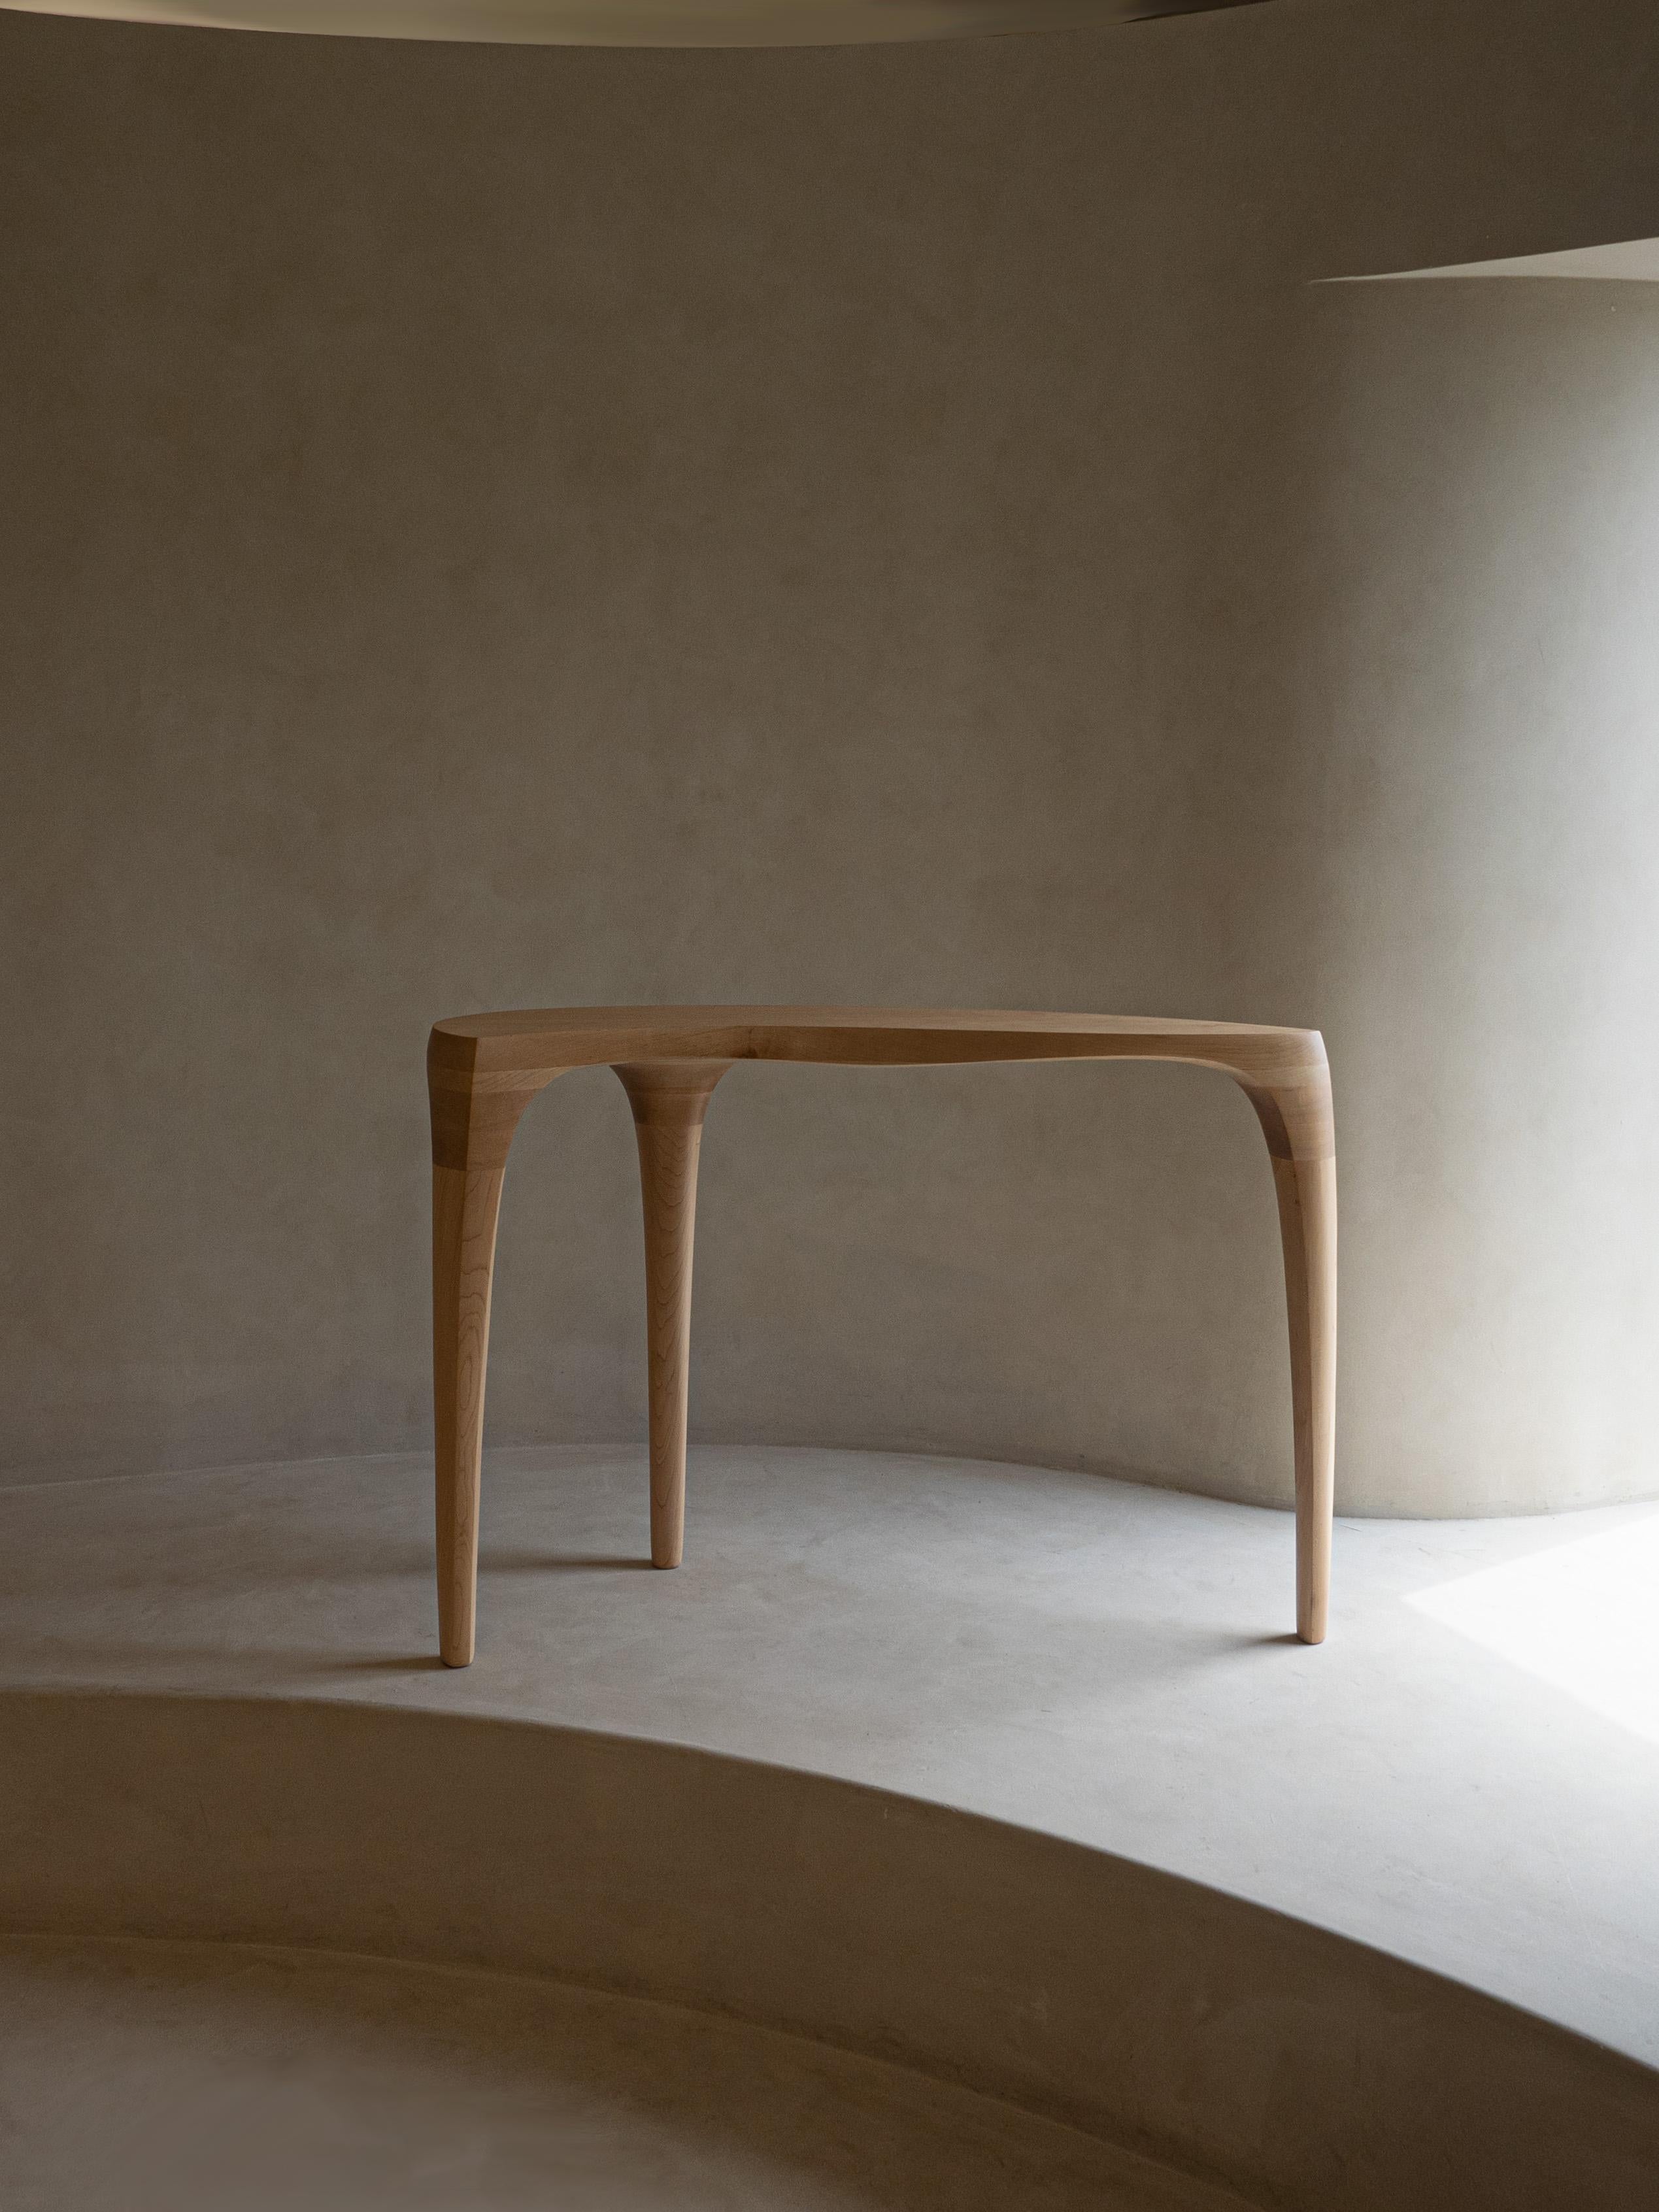 American Sculptural Console Table in Hard Maple Wood - 'Momentum Table' by Soo Joo For Sale